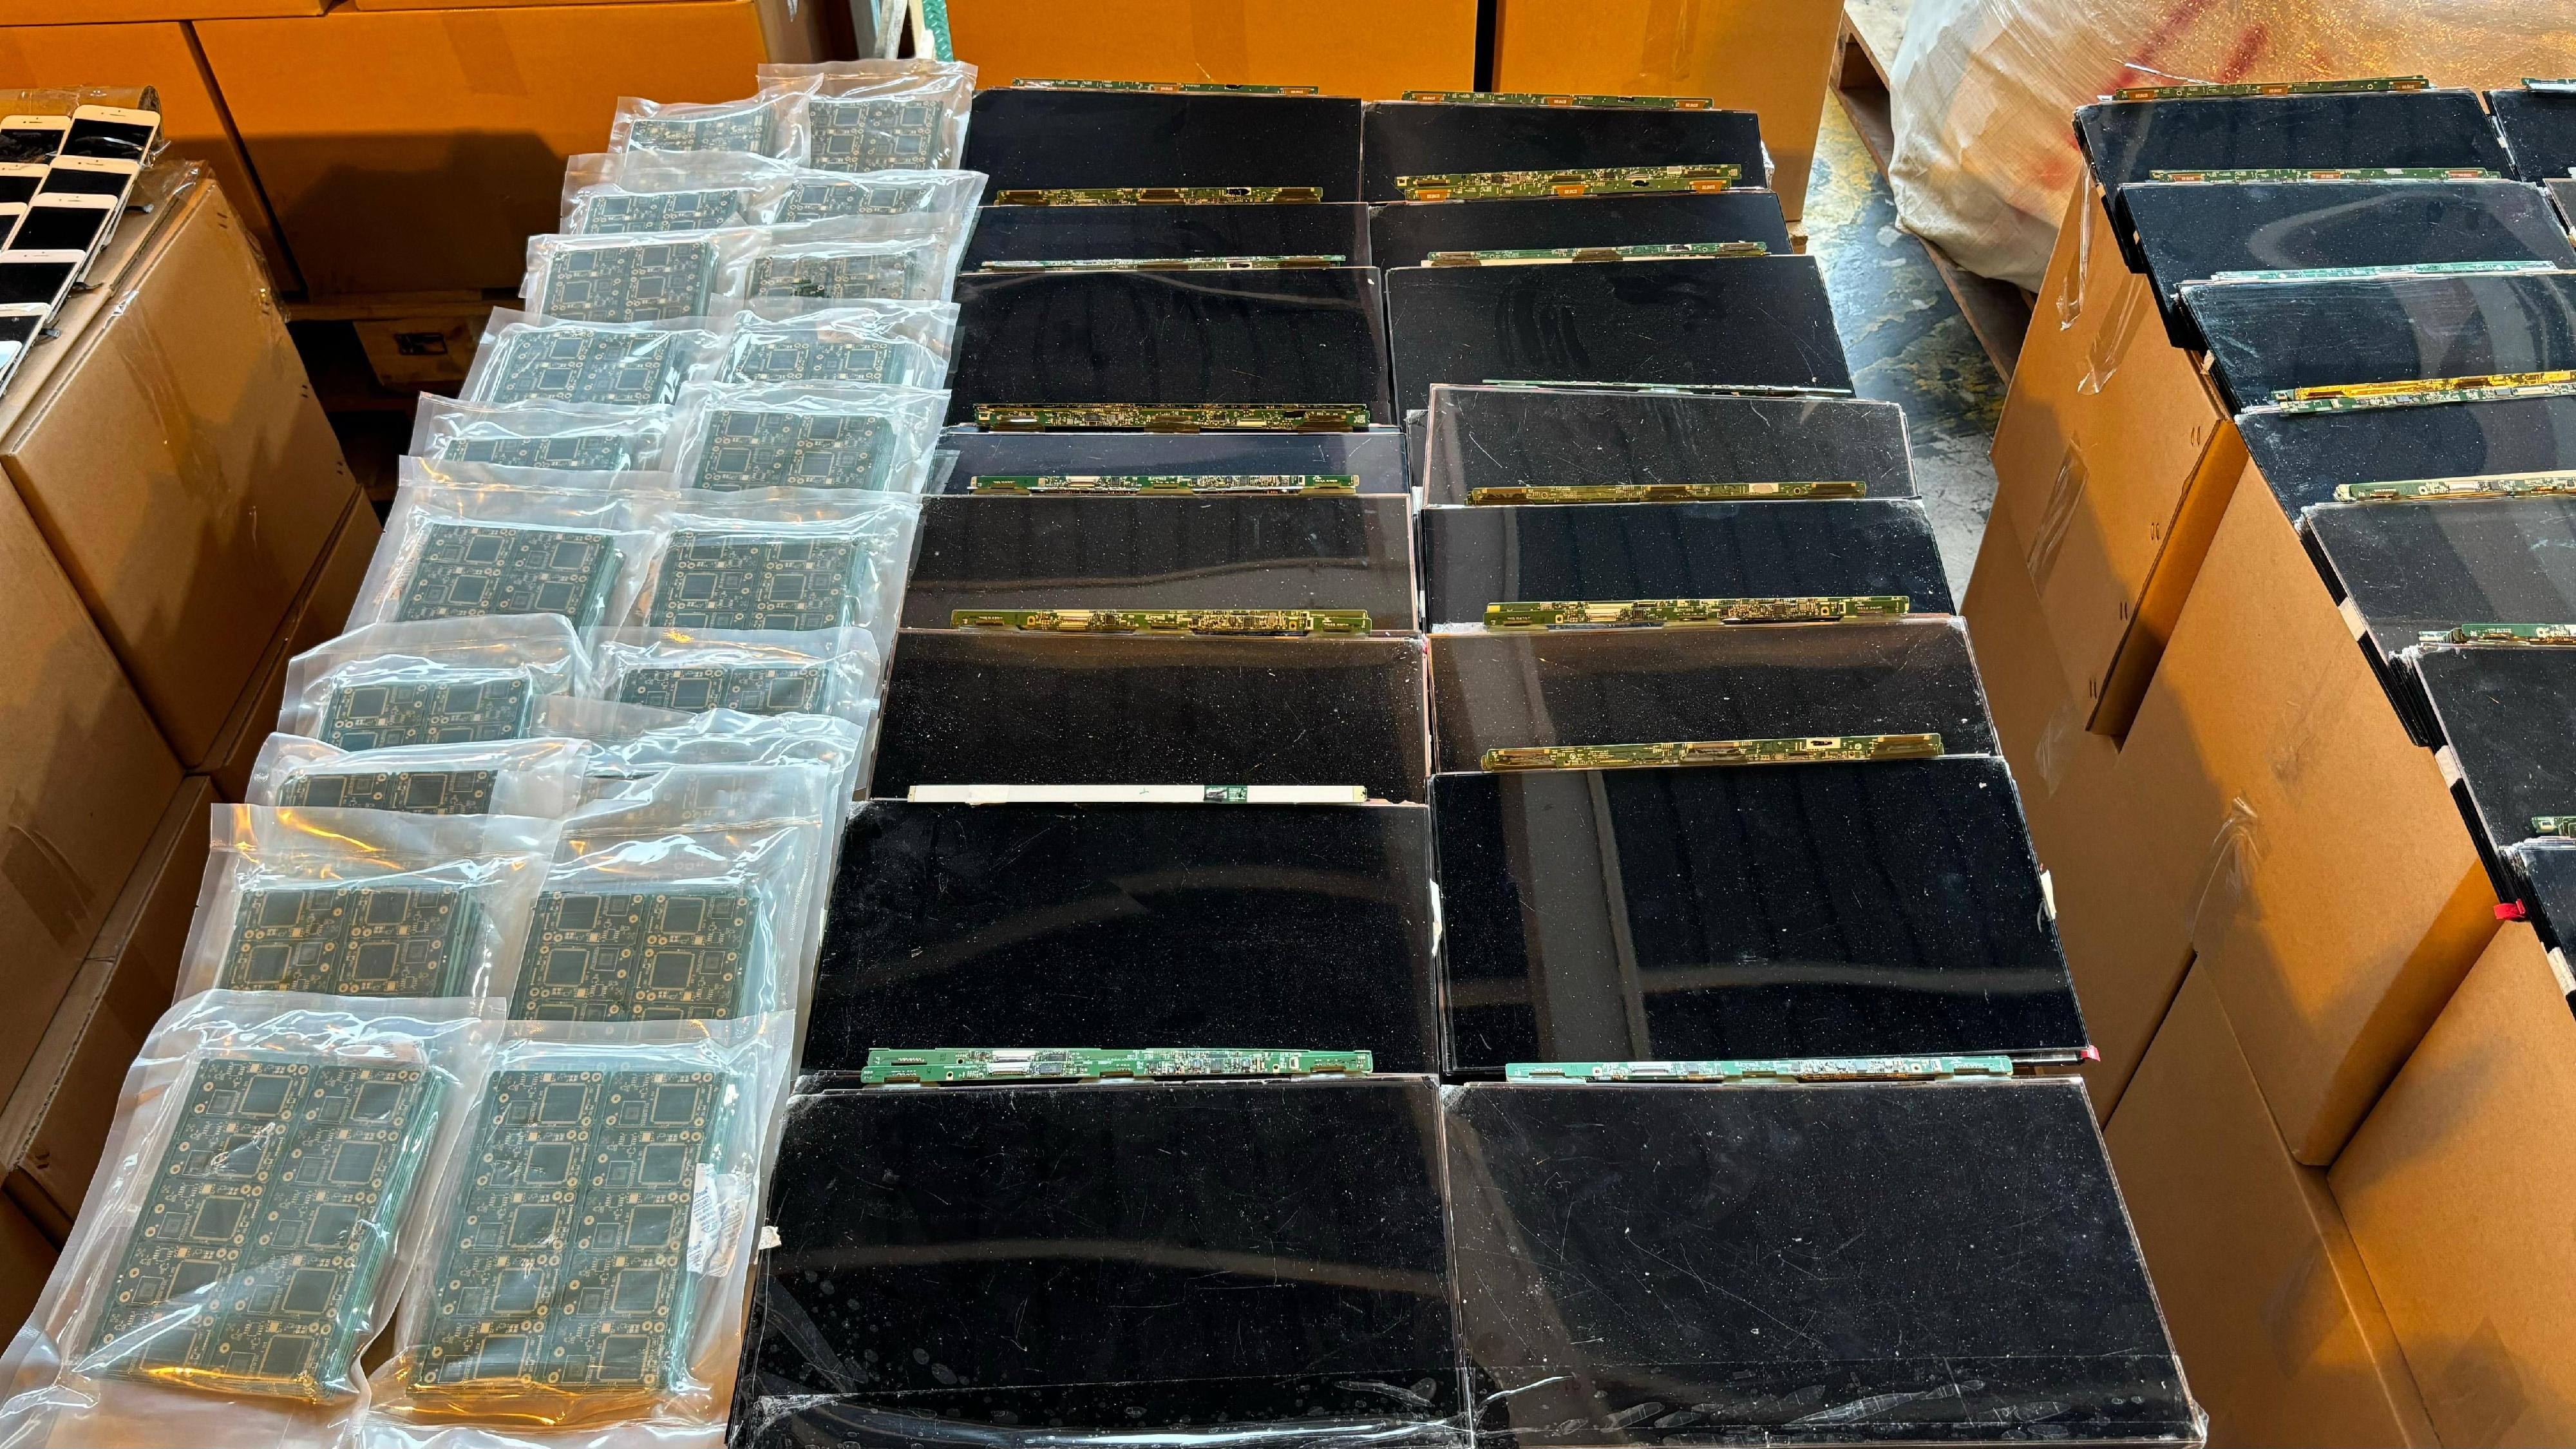 Hong Kong Customs on June 4 detected a suspected case of using an ocean-going vessel to smuggle goods to Malaysia at the Kwai Chung Container Terminals. A large batch of suspected smuggled electronic components and waste, with a total estimated market value of about $80 million, was seized. Photo shows the suspected smuggled motherboards and displays seized.